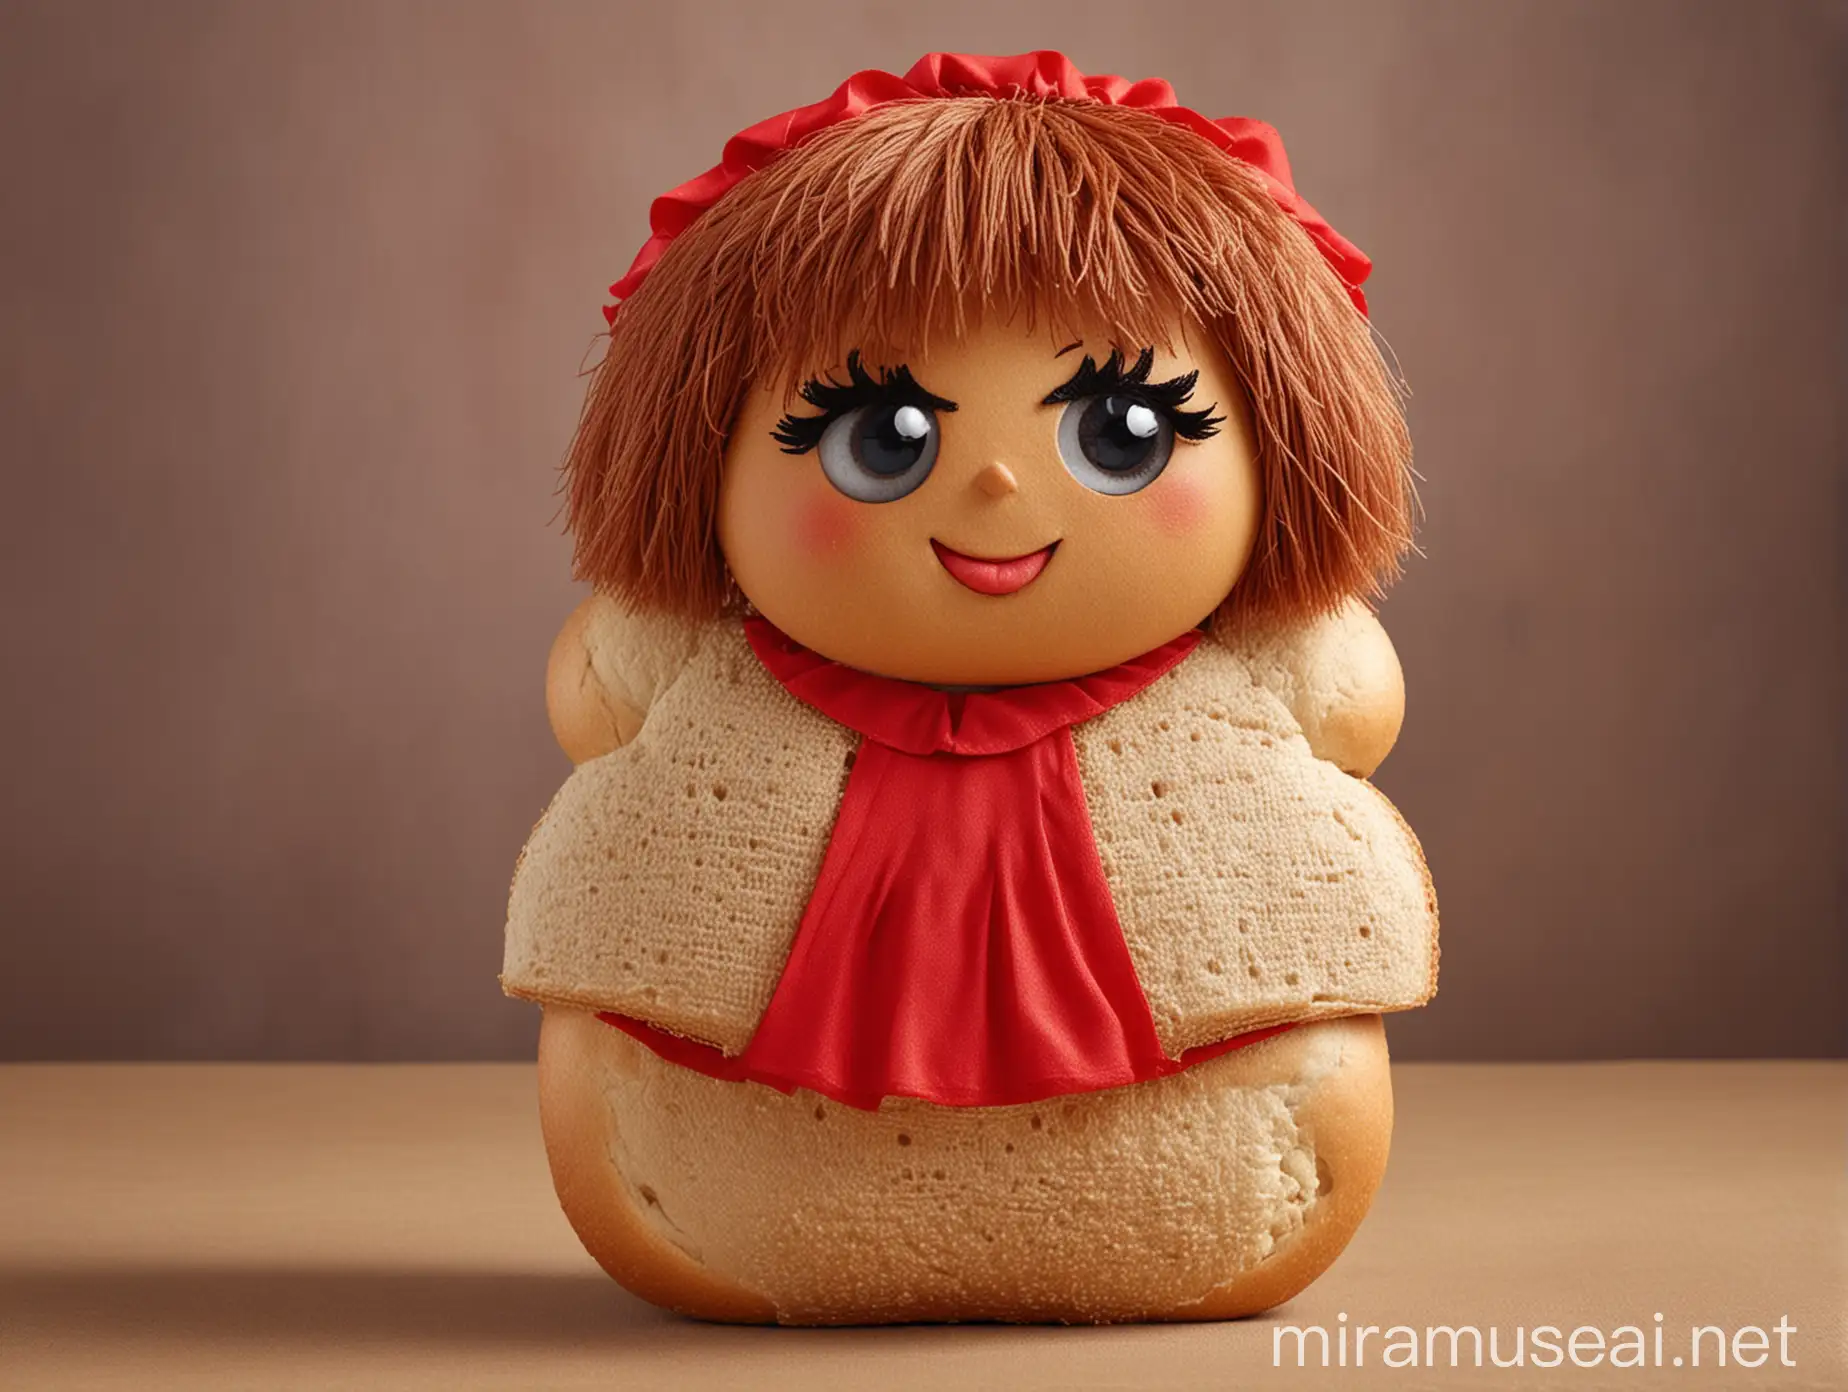 Cartoon Character Fiber Bread Costume with Brown Wig and Red Dress